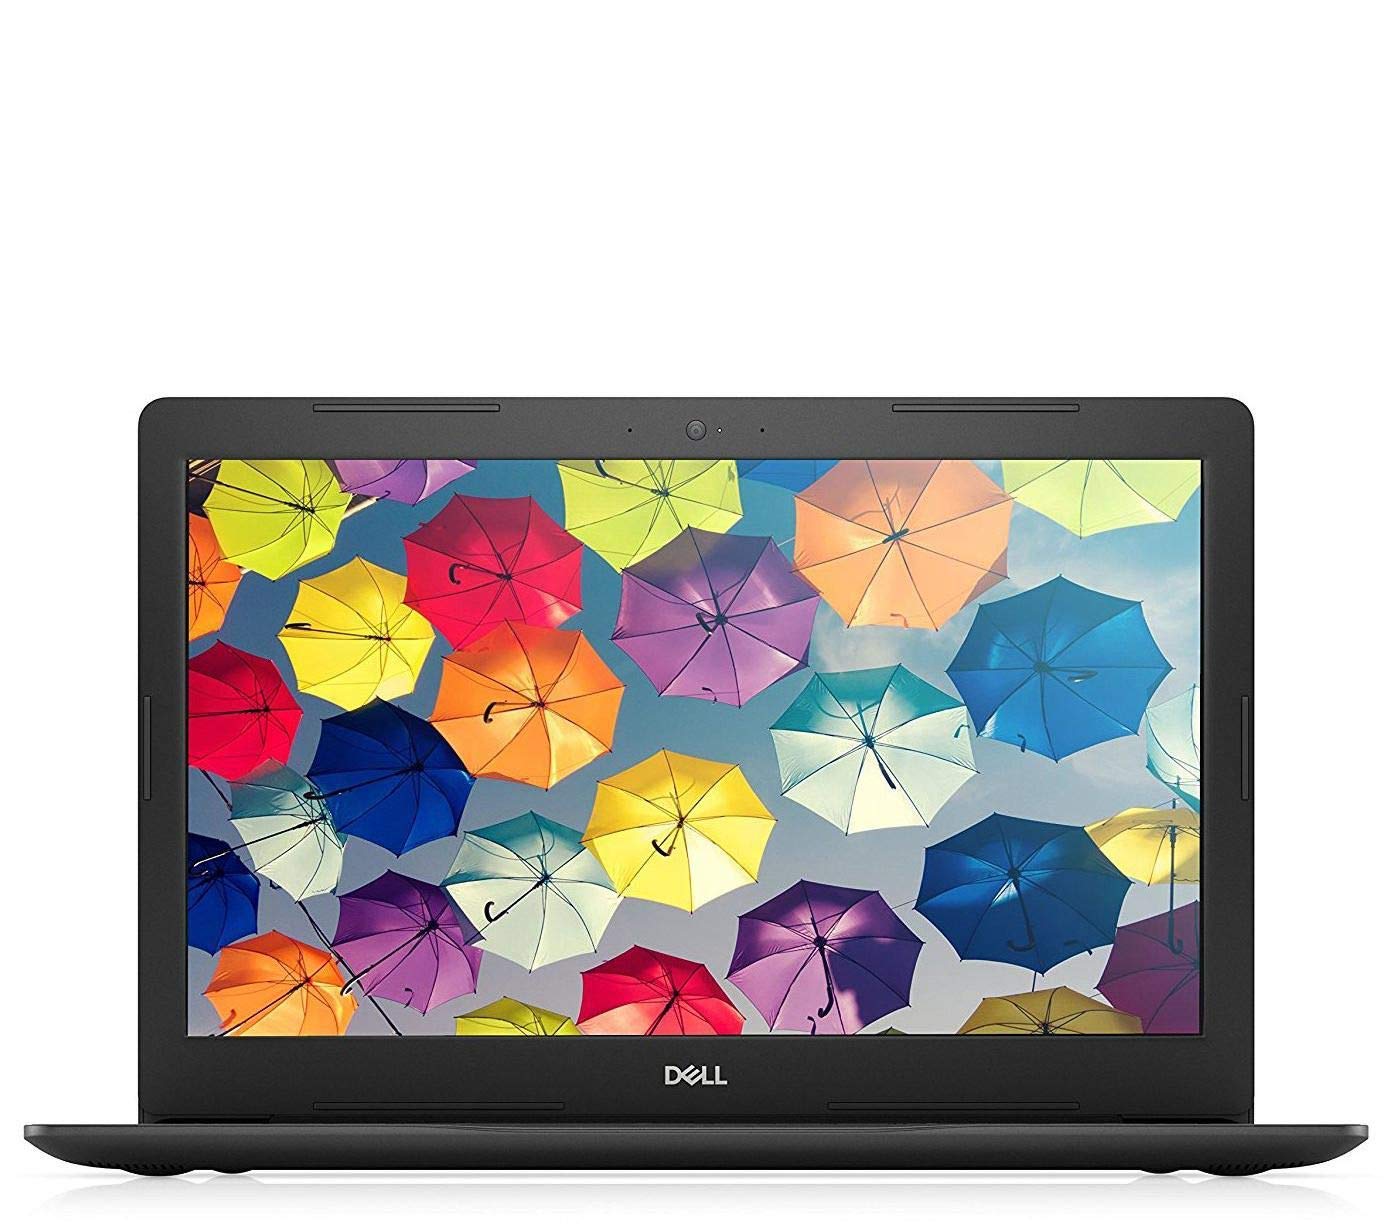 Book Cover Dell Inspiron 15-5570 15.6in FHD Touchscreen Laptop PC - Intel Core i3-8130U 2.2GHz, 12GB, 1TB HDD, DVDRW, Webcam, Bluetooth, Intel UHD 620 Graphics, Windows 10 Home (Renewed)